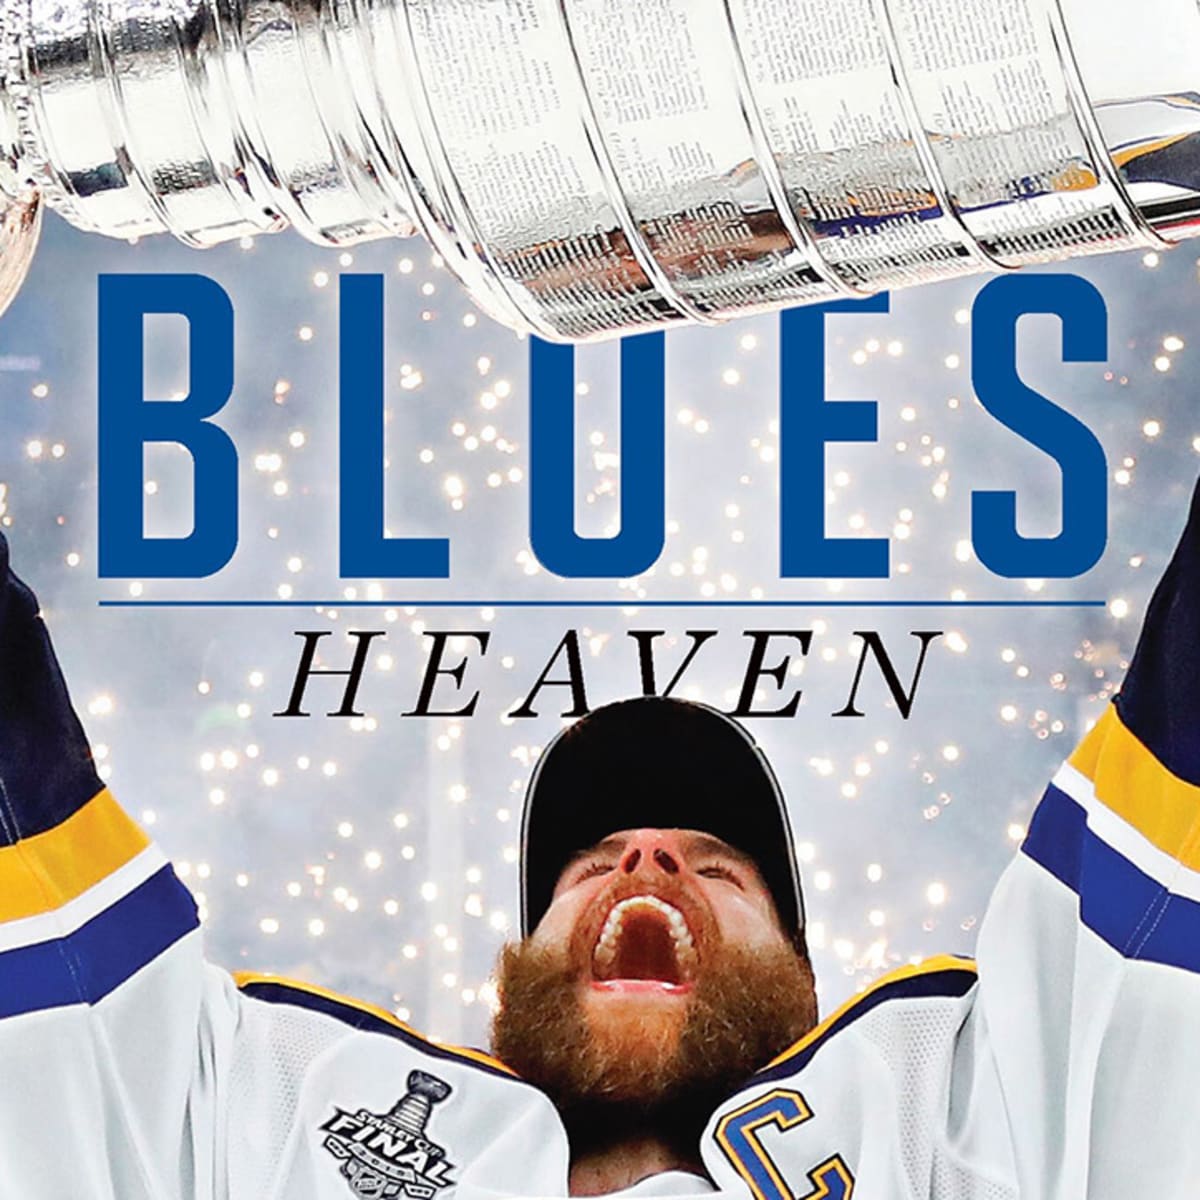 Glorious: The St. Louis Blues' Historic Quest for the 2019 Stanley Cup: St.  Louis Post-Dispatch: 9781629376653: : Books